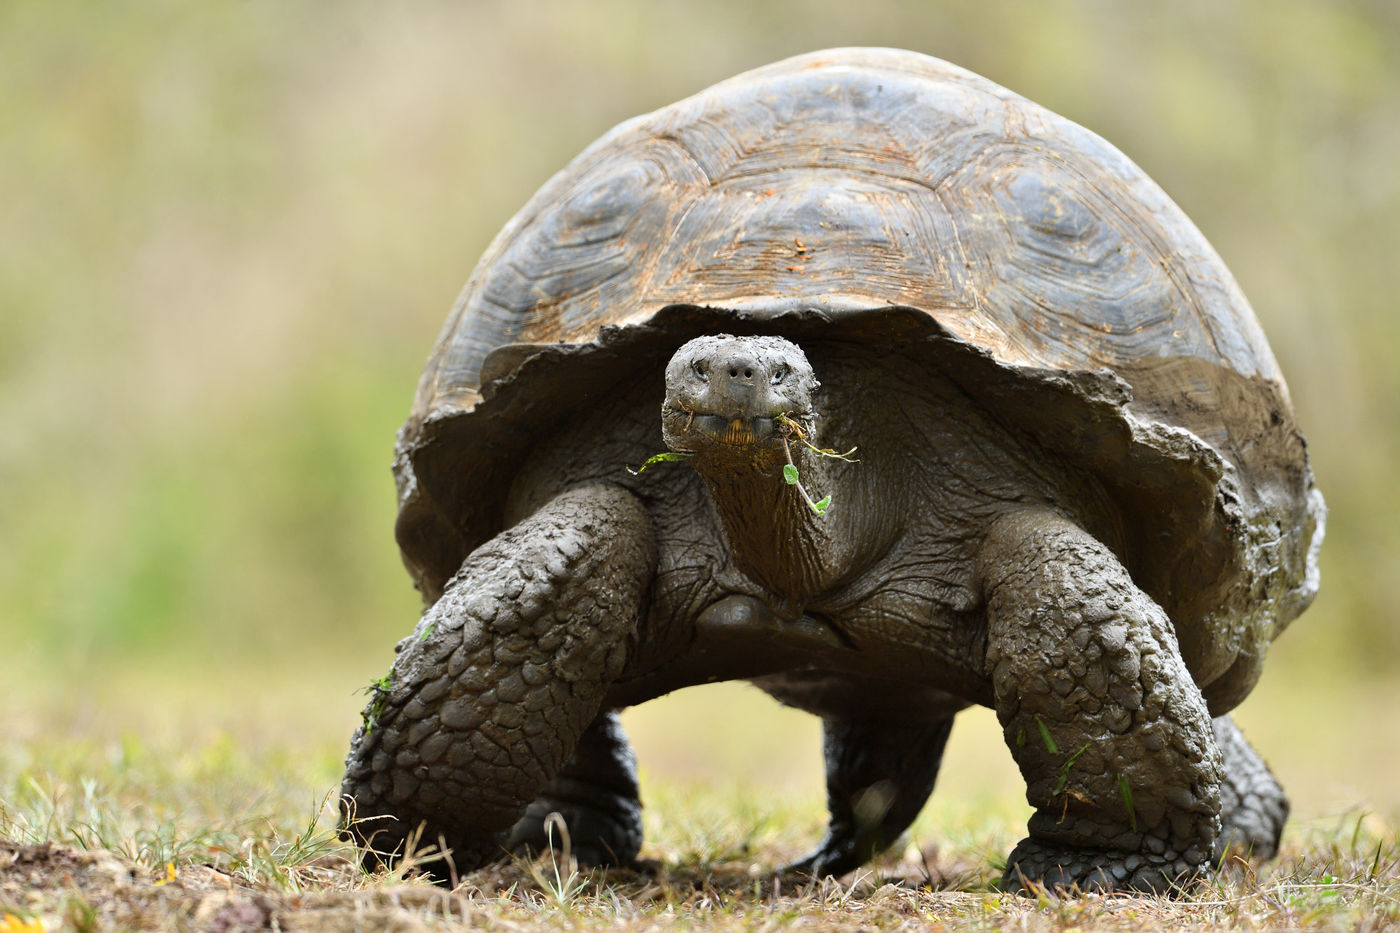 This giant, the Galapagos tortoise, is one of the most spectacular endemics of the island. © Yves Adams